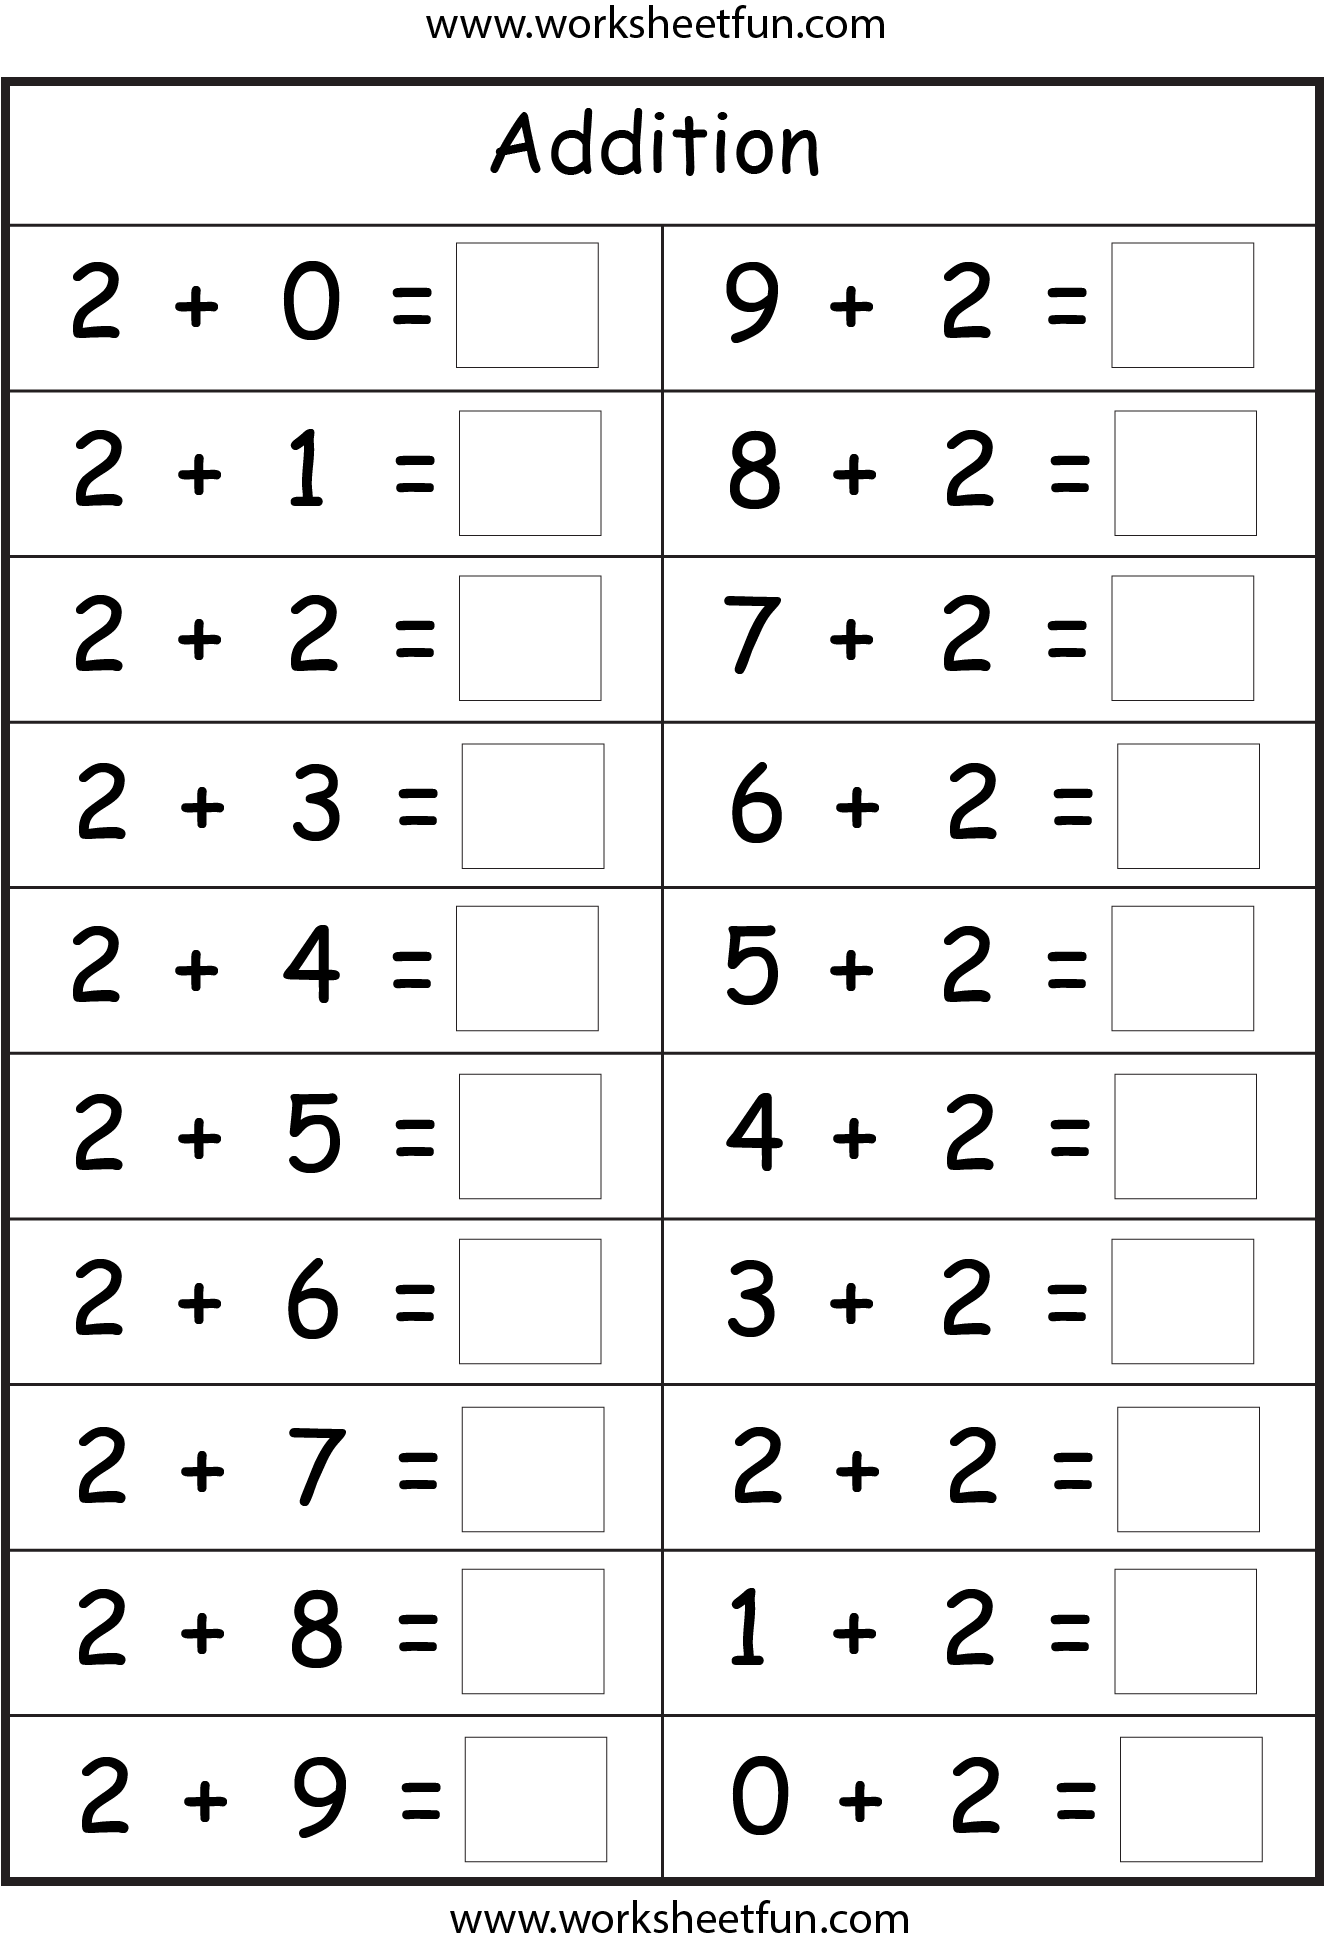 simple addition worksheets this simple addition worksheet helps to